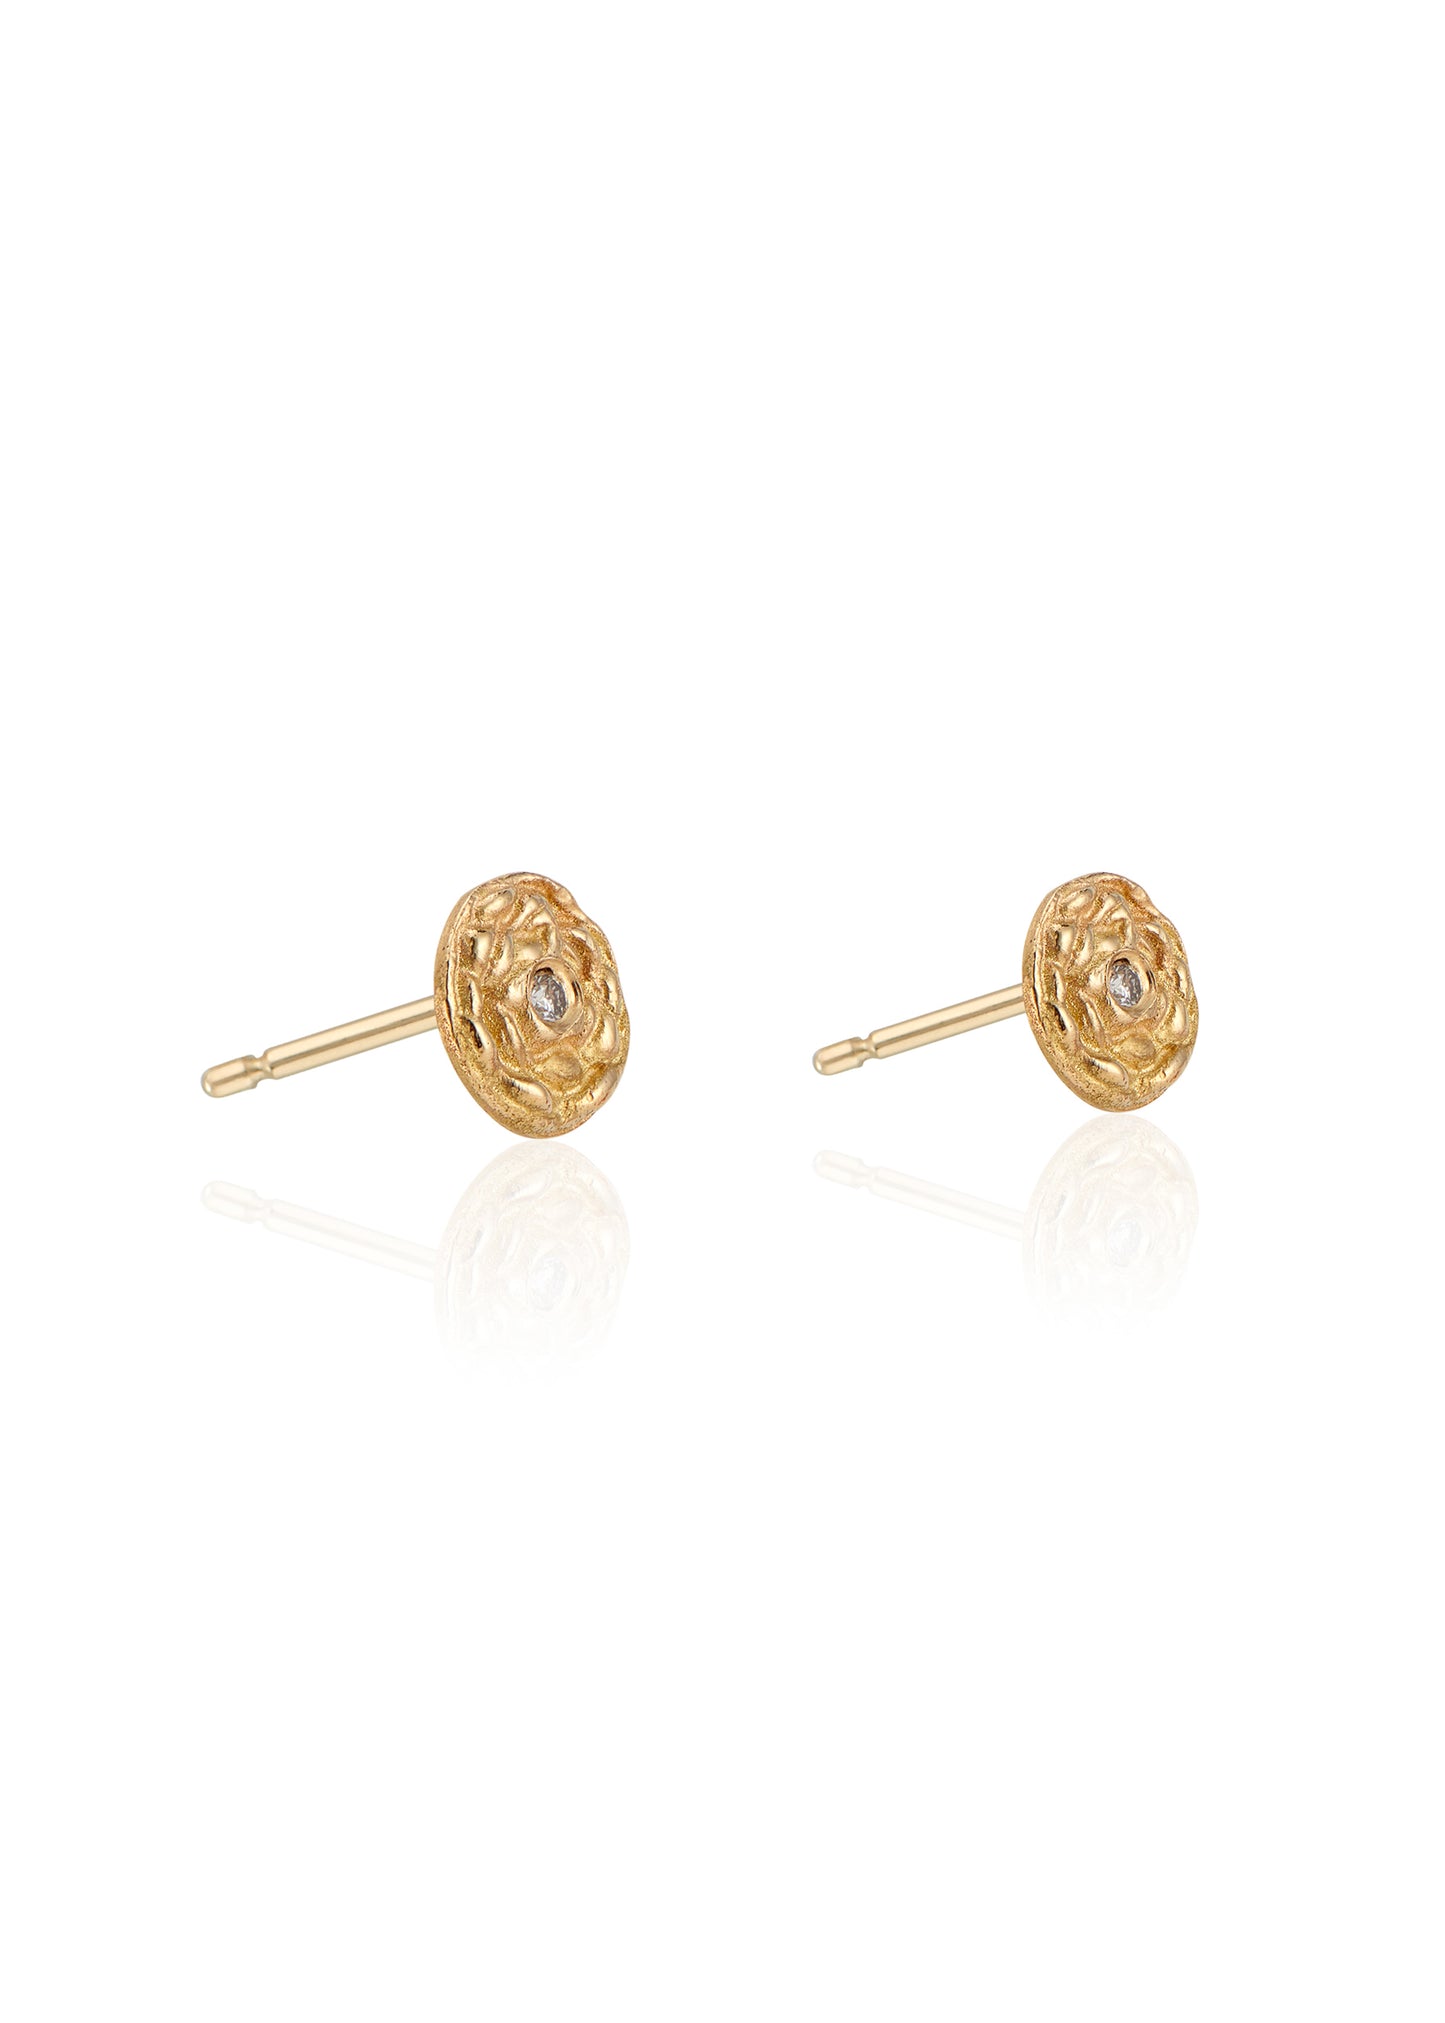 Like an echo of the past that comes full circle, the Beaded earring captures old world craftsmanship made modern for today’s everyday wear. Hand-carved beads create a stunning spiral, drawing the eye in to a brilliant diamond accent. 